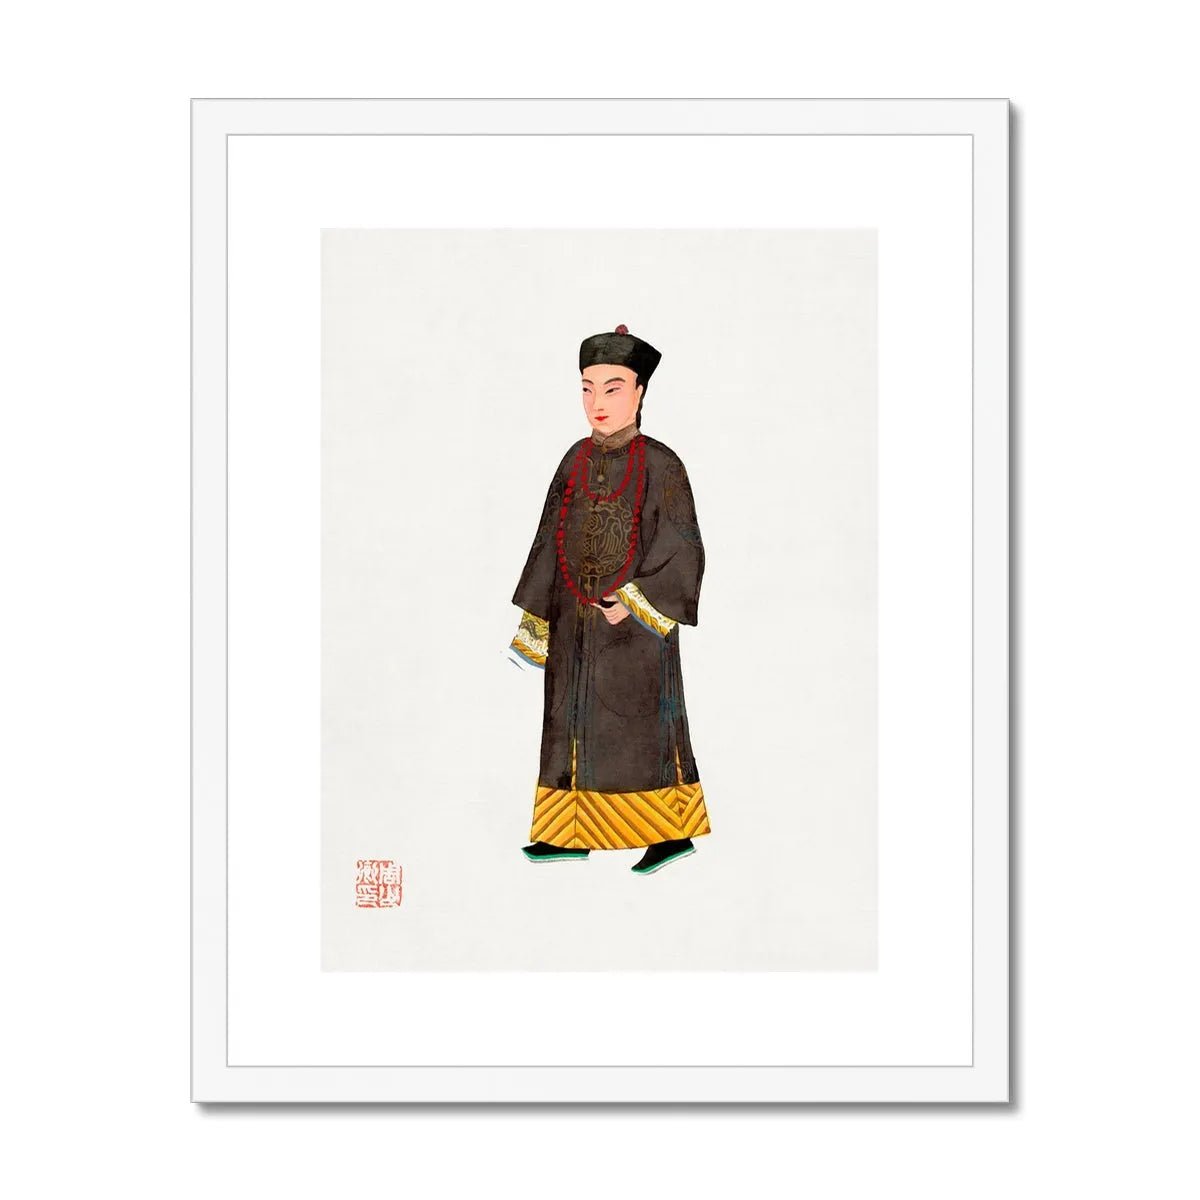 Chinese Emperor’s Courtier Framed & Mounted Print - 16’x20’ / White Frame - Posters Prints & Visual Artwork